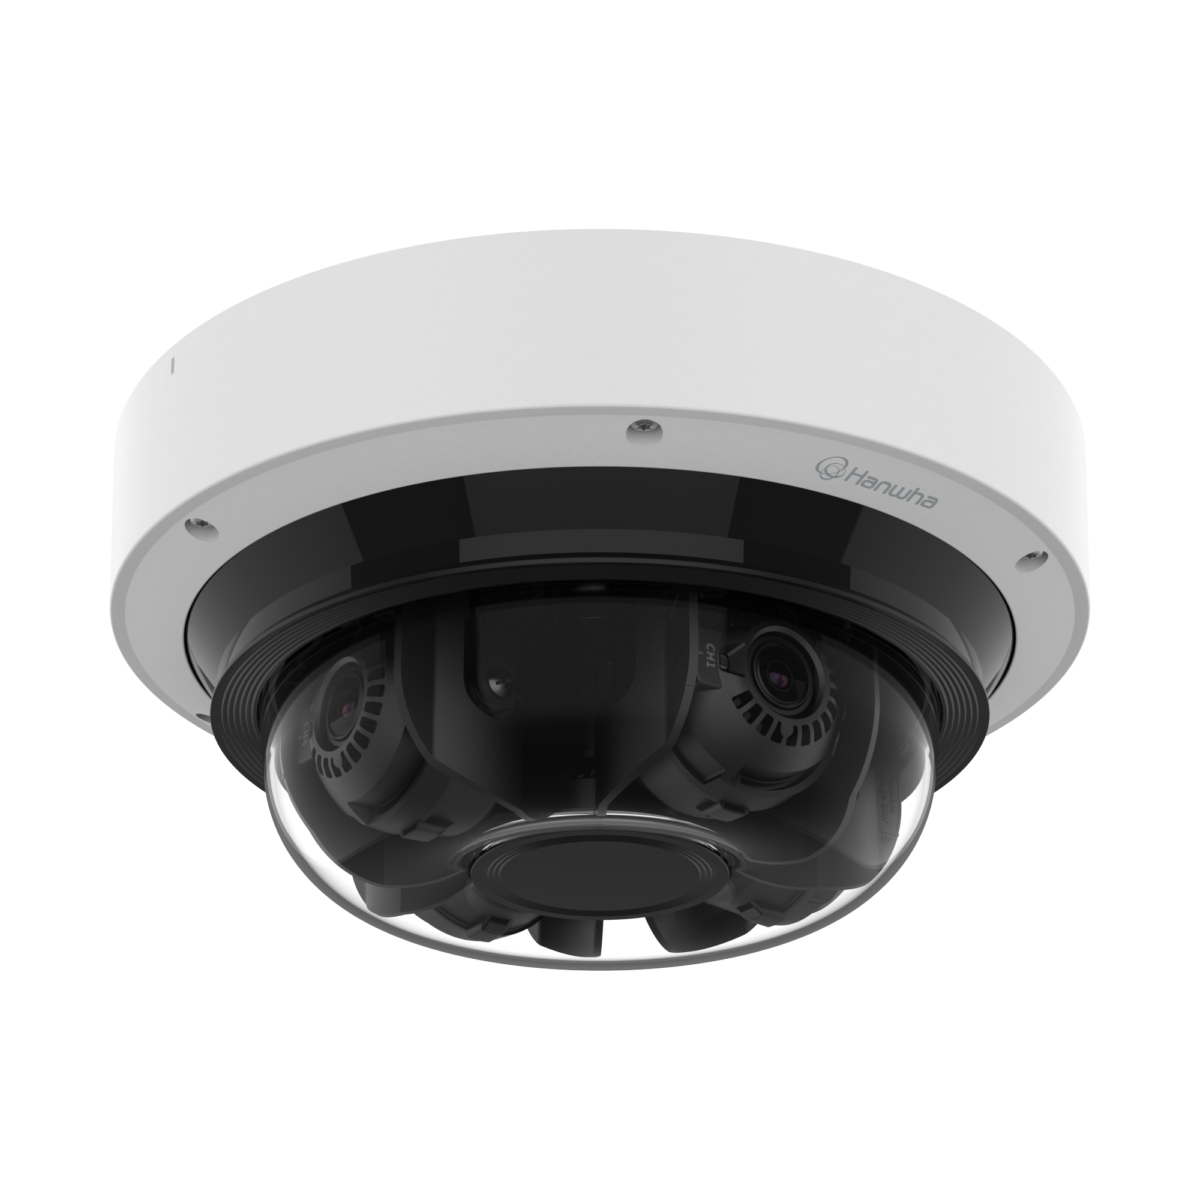 Hanwha PNM-C32083RVQ 4CH x 8MP 20FPS Wisenet P Series Network Vandal Outdoor Multi-Directional Camera